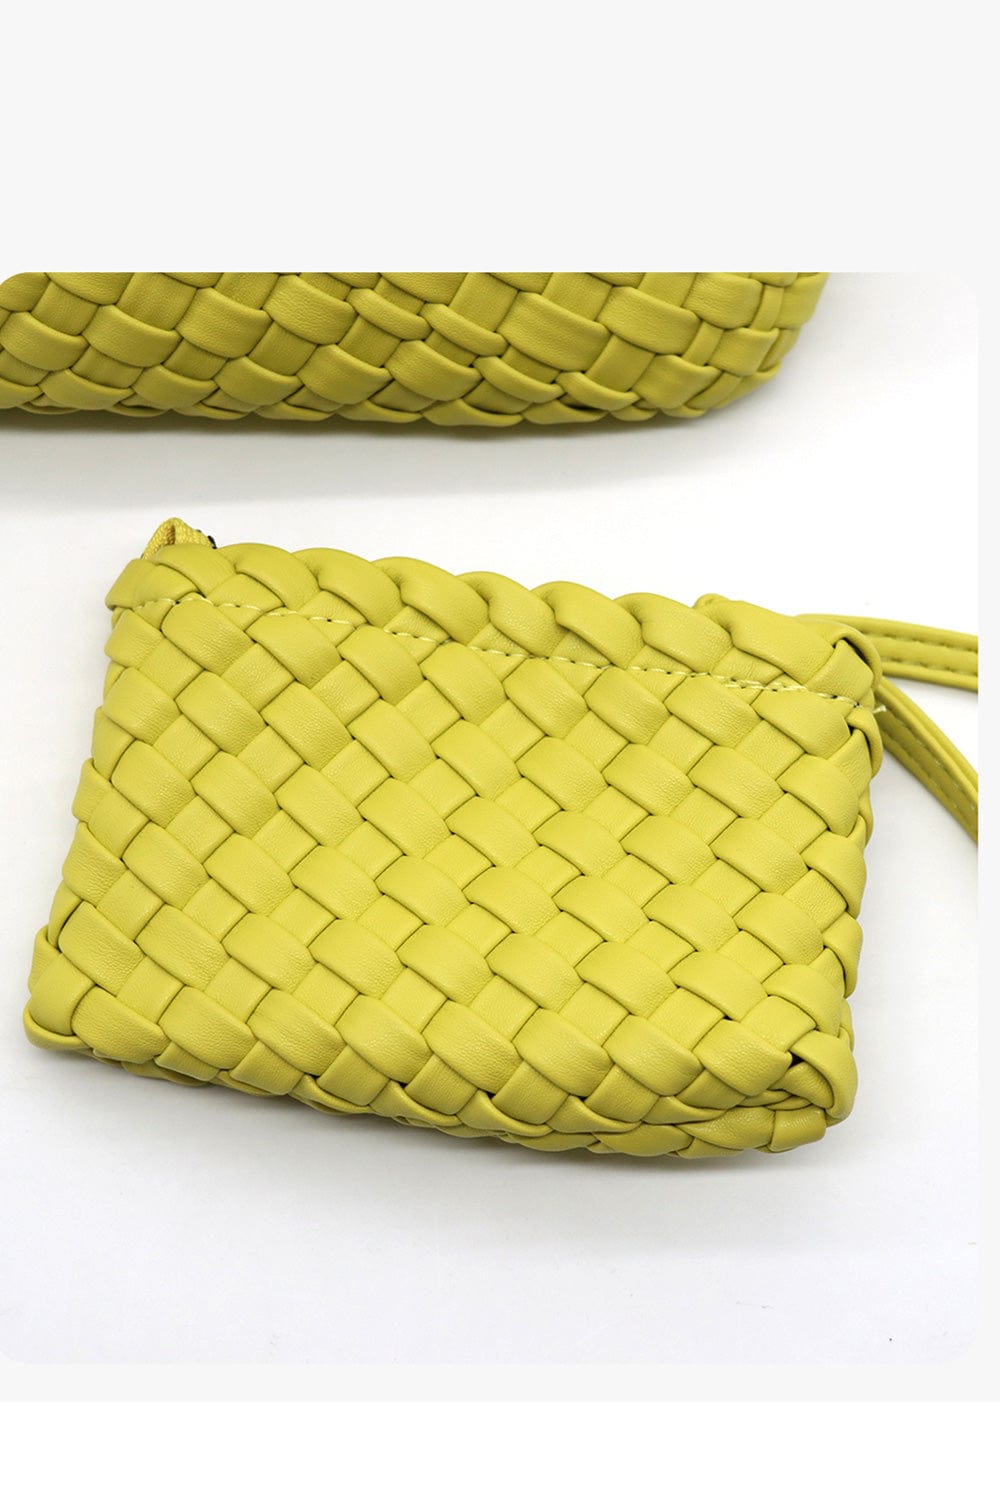 Braided Faux Leather Mini Tote Bag lime coin pouch| MILK MONEY milkmoney.co | women's accessories. cute accessories. trendy accessories. cute accessories for girls. ladies accessories. women's fashion accessories.